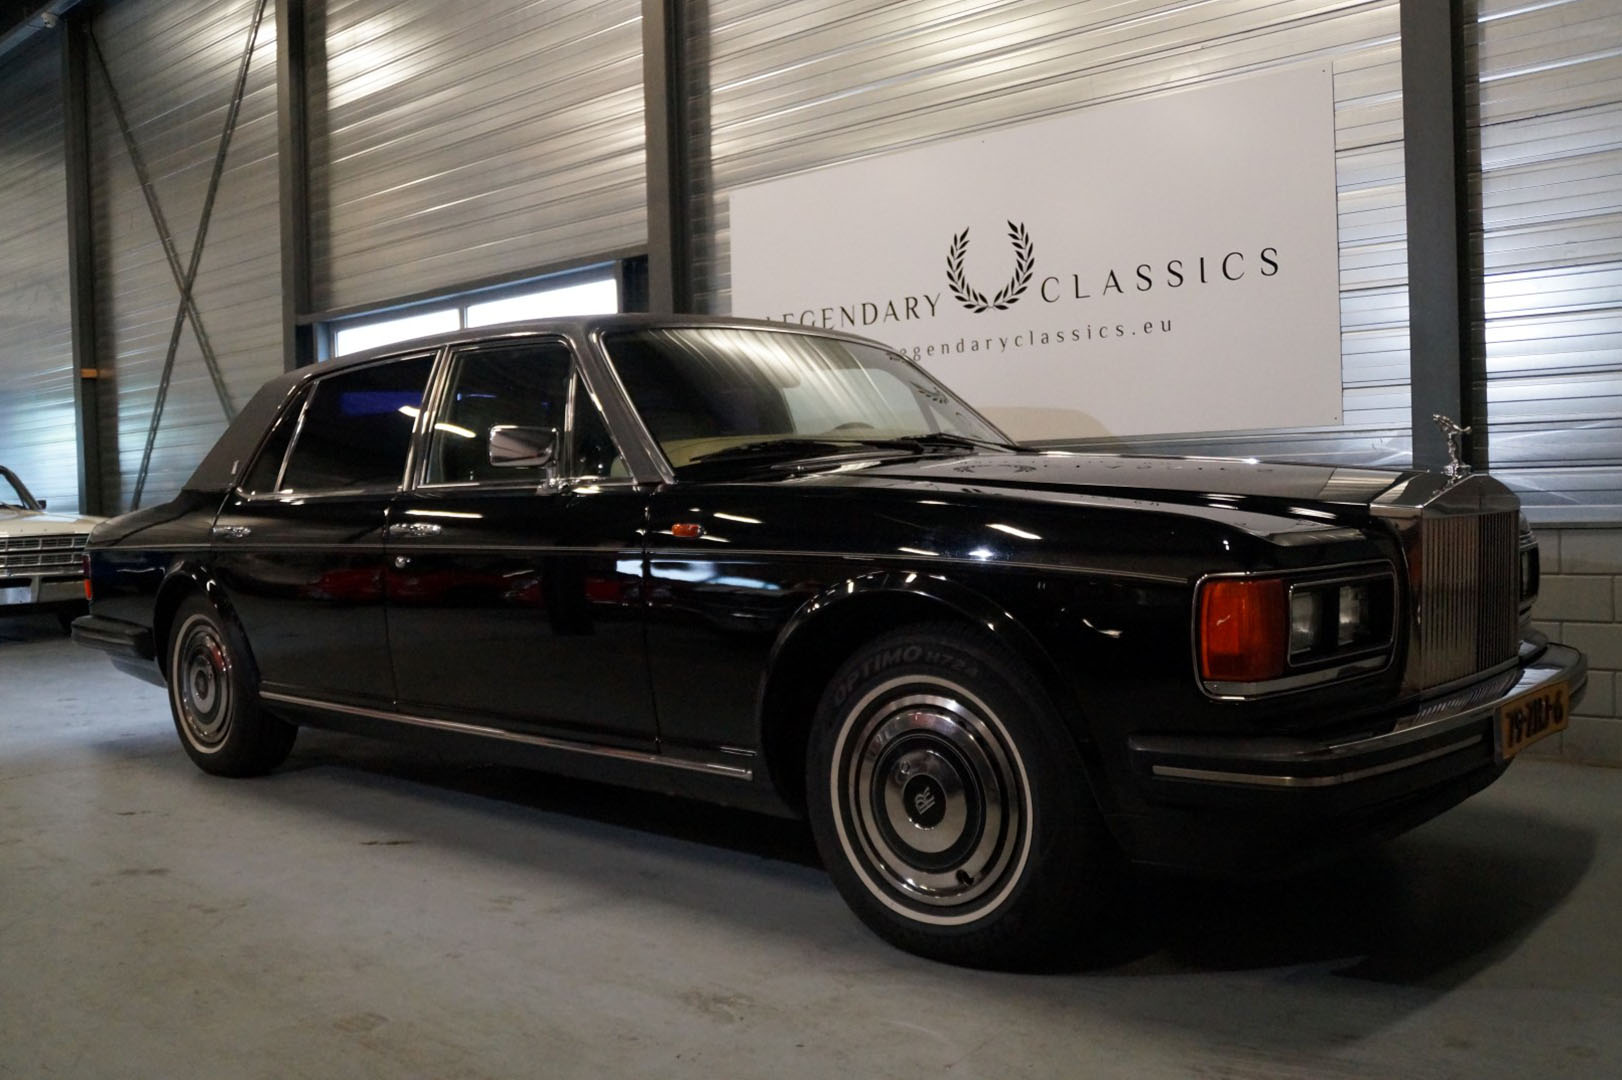 Buy this Rolls Royce silver spur   at Legendary Classics (1)